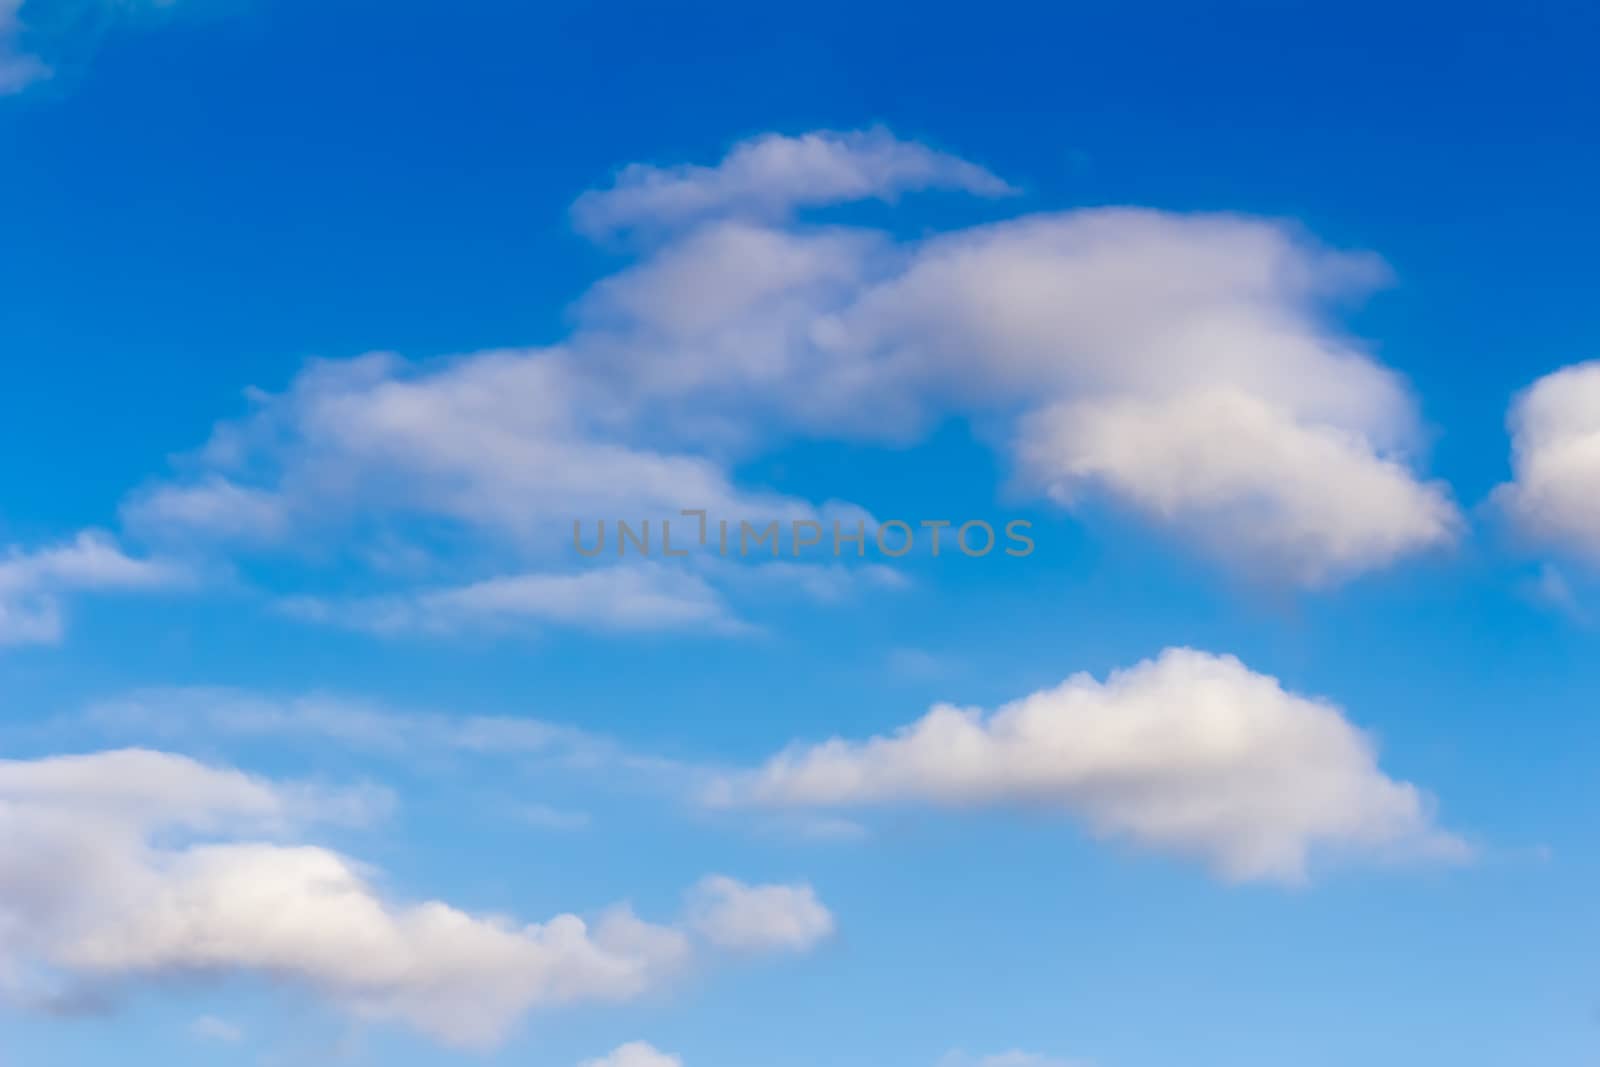 White fluffy clouds float on the blue sky in a clear sunny day.